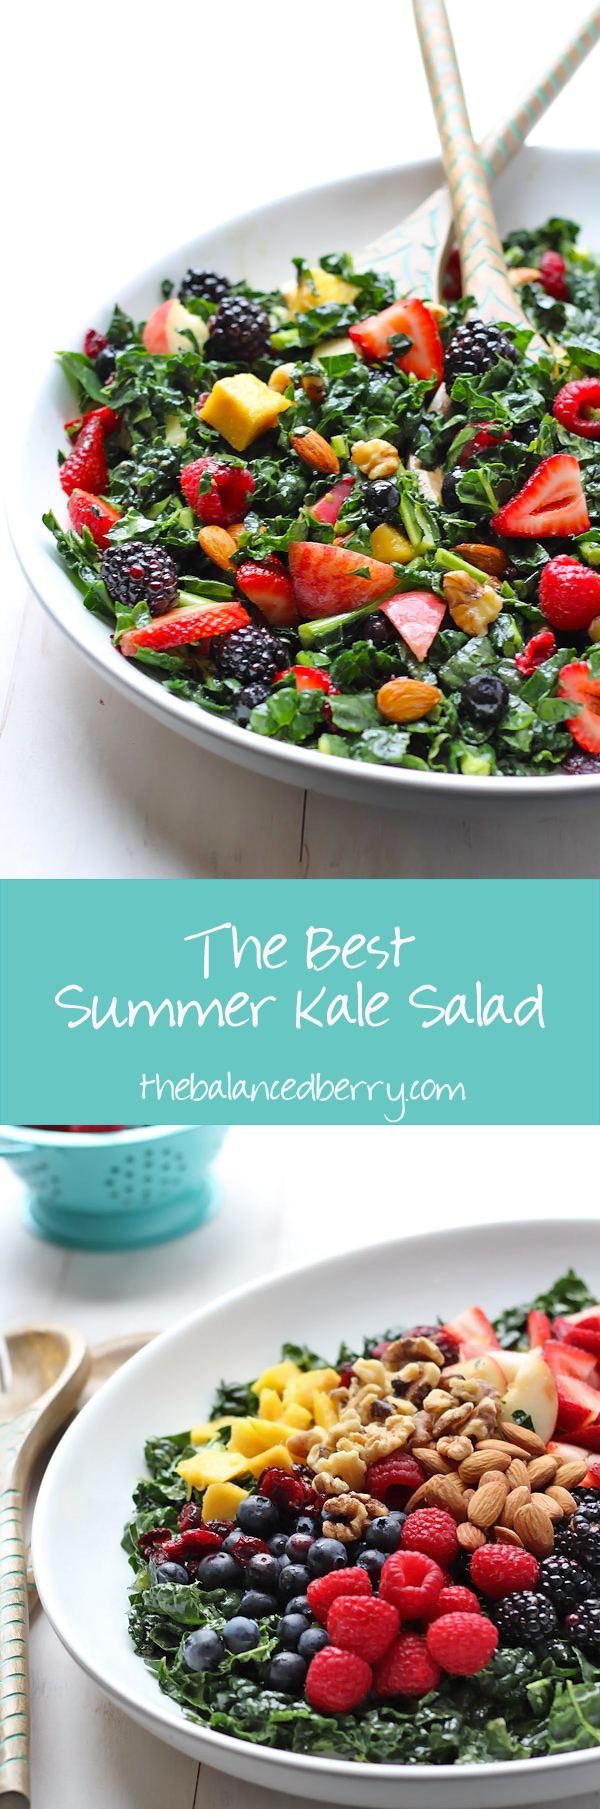 The Best Summer Kale Salad - perfect for any summer BBQ! via thebalancedberry.com